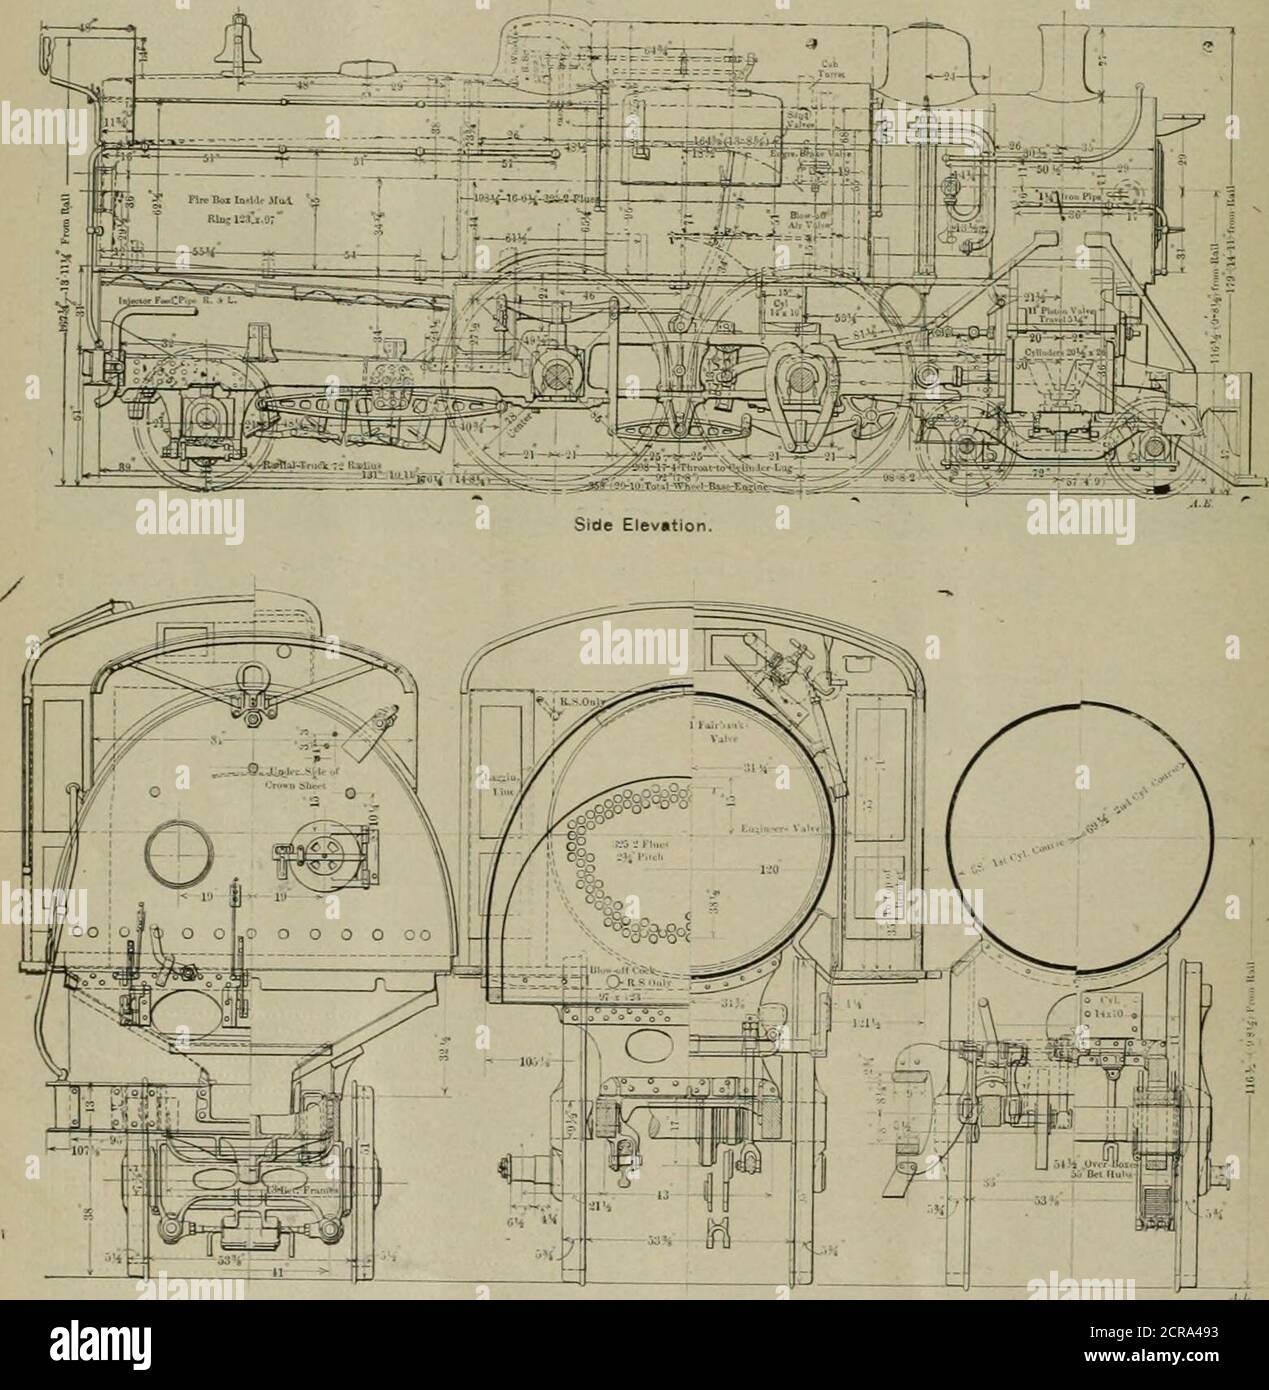 . American engineer and railroad journal . arrel front 68 Ins. Boiler, diameter of barrel at throat ■•-pi &gt;s. Seams kind of horizontal So*!p c Seams, kind of circumferential ....Triple crown sheer stayed with Radial Dome, diami Firebox, type v;, , Firebox, length 16 AMERICAN ENGINEER AND RAILROAD JOURNAL. Firebox, width 97 ins. Firebox, depth, front 5&lt;i Uis. Firebox, depth, back 4s Ins, Firebox, material Steel Firebox, thickness of sheets..Crown, % In.; tube, % In sldi Firebox, brick arch . None Firebox, mud ring width . M4 ins. back, ■ ■■■■ Ins Bides. 4 Ins. frontFirebox, water space at Stock Photo